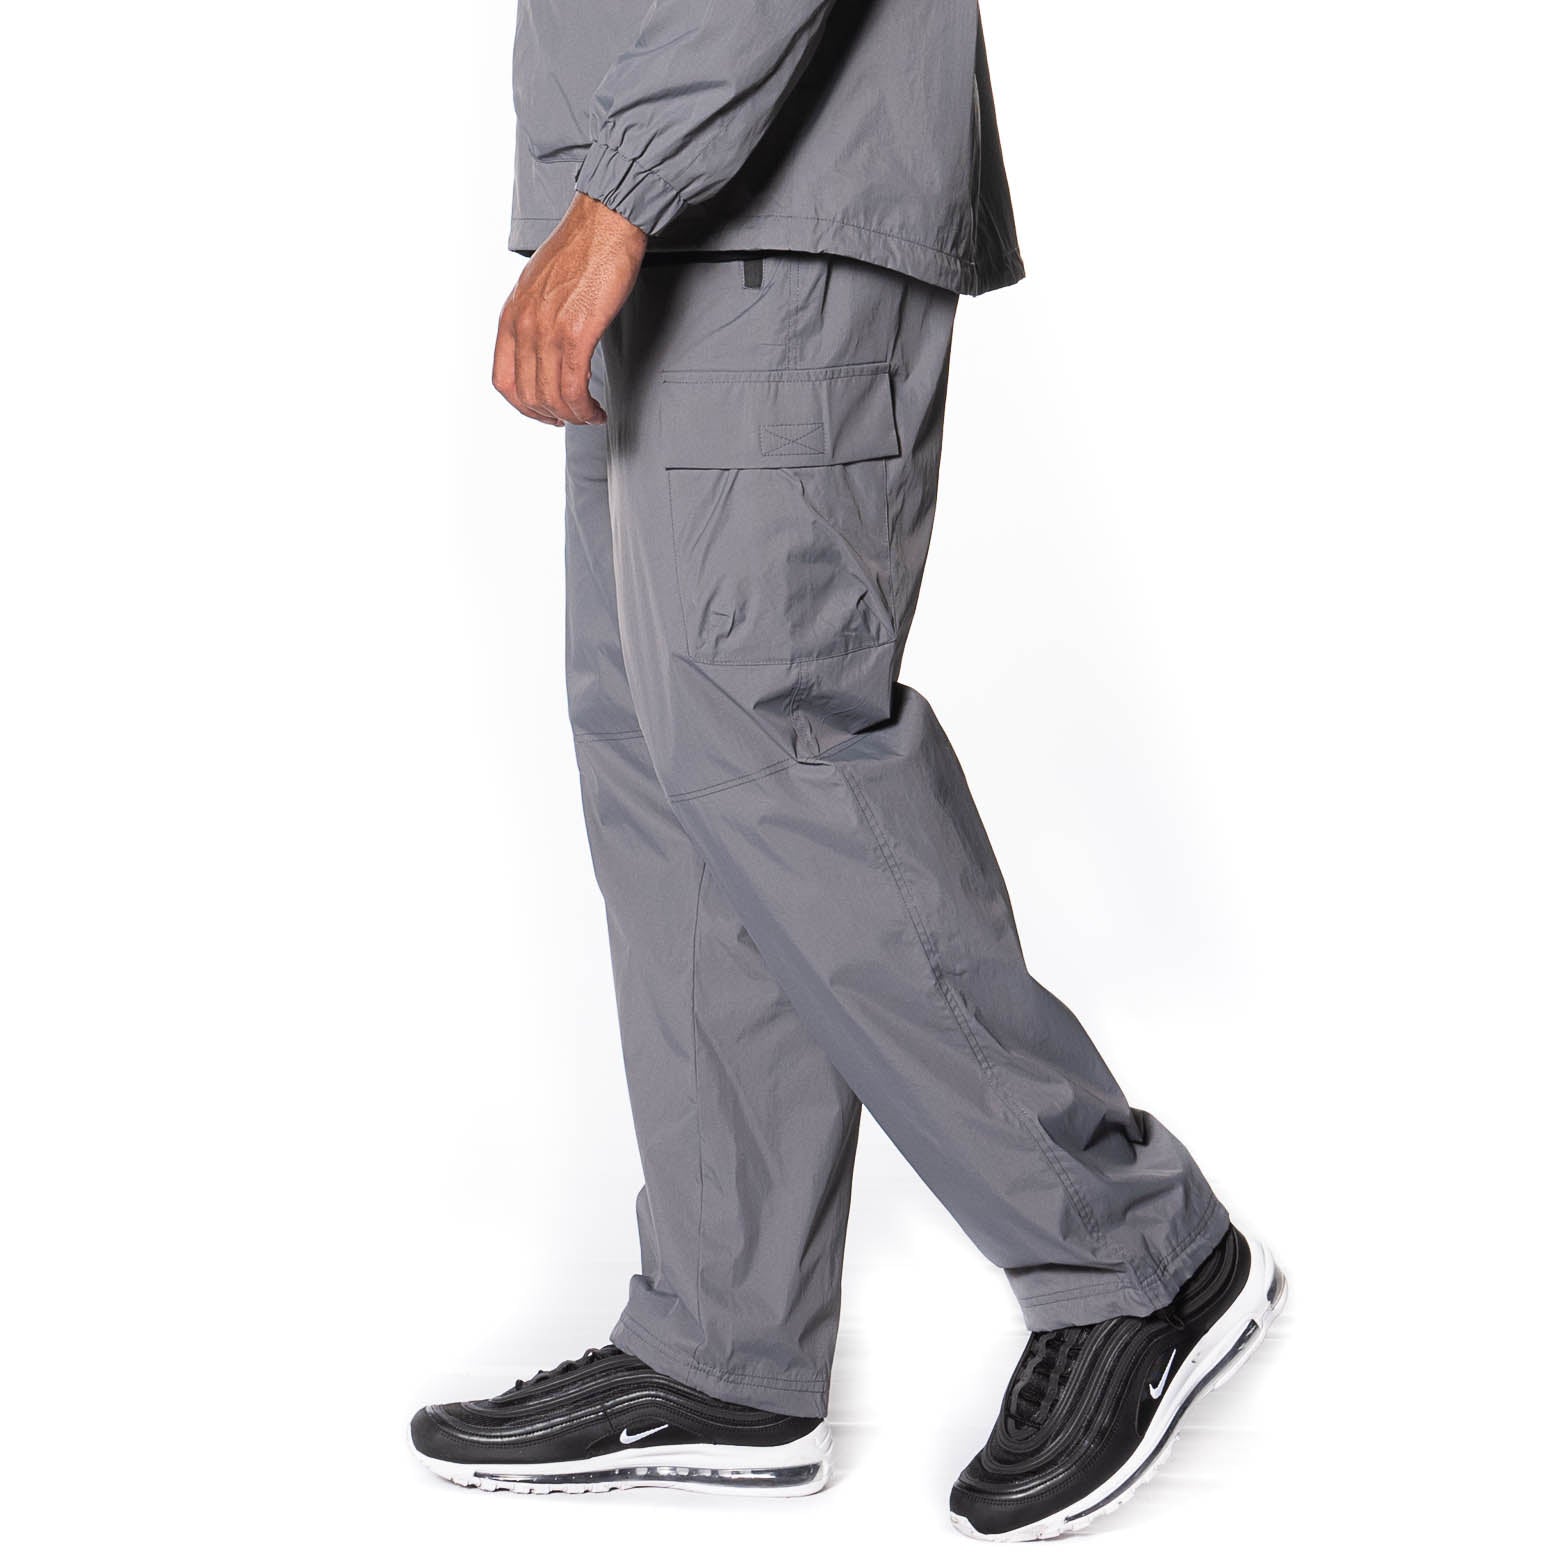 Children's Ripstop Nylon Sweat Pant by Body Wrappers : 071 body wrapper ,  On Stage Dancewear, Capezio Authorized Dealer.